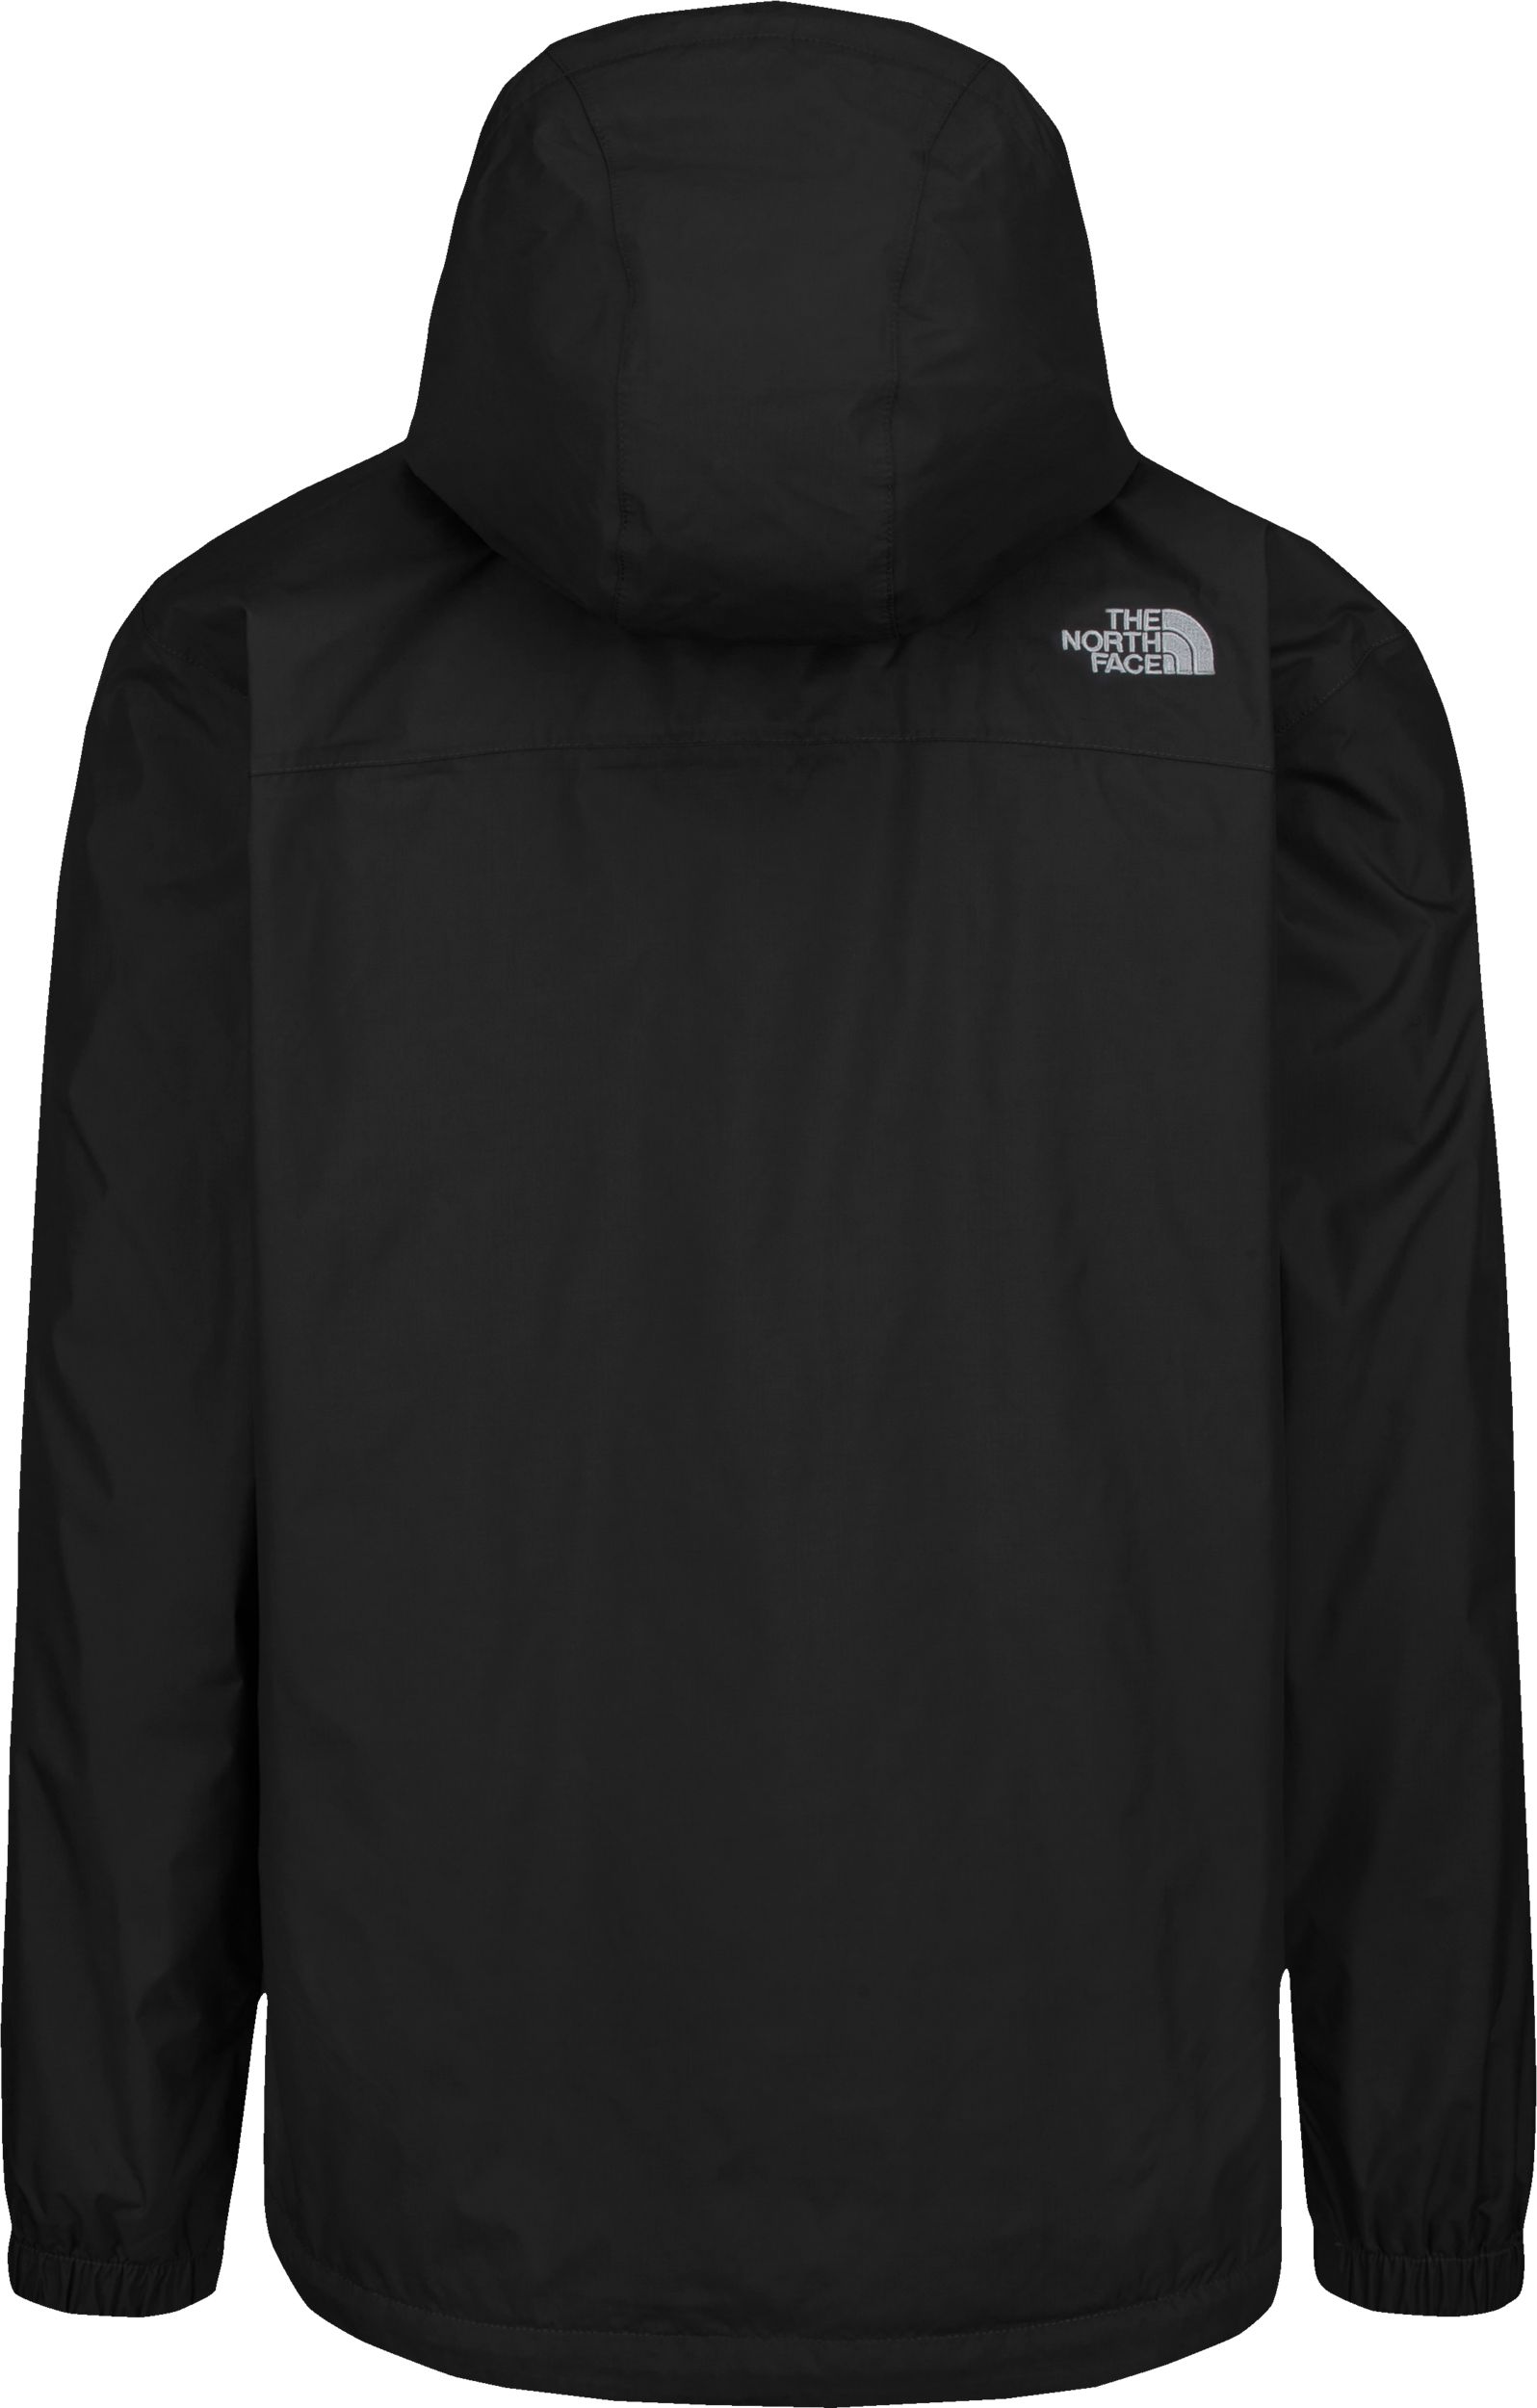 Buy The North Face Men's Resolve Waterproof Jacket, Black, Large Online at  Low Prices in India 